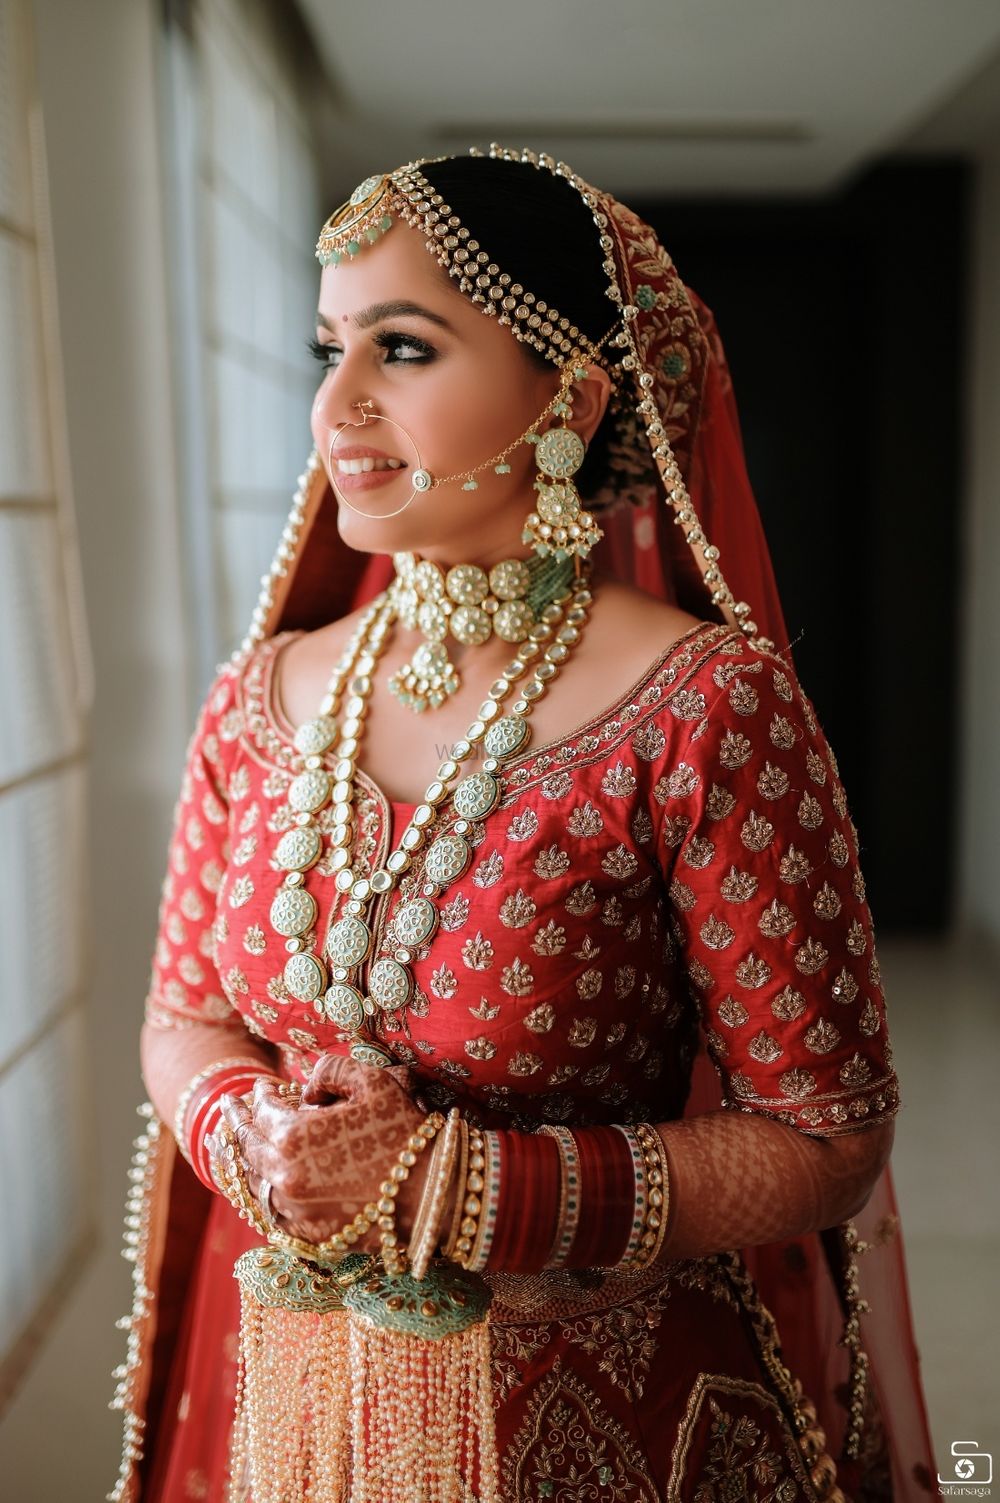 Photo of Bride dressed in red lehenga with contrasting jewellery.